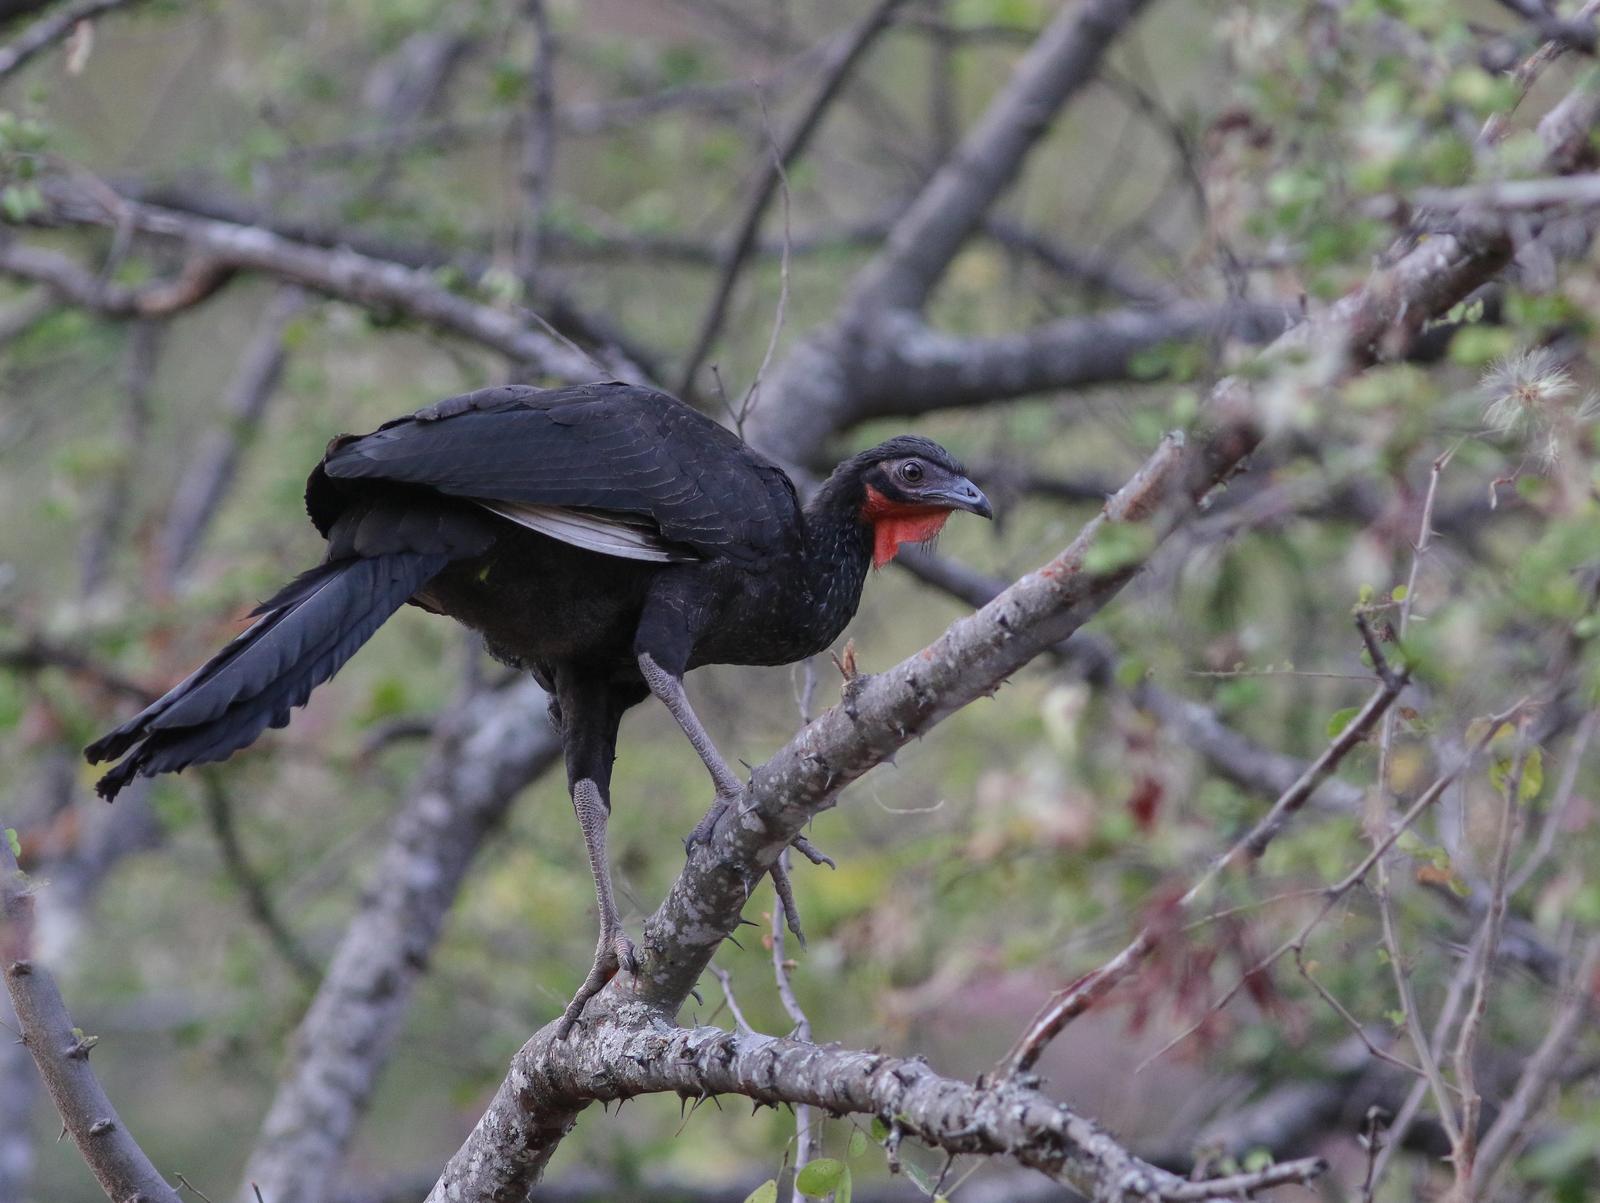 White-winged Guan Photo by Leonardo Garrigues